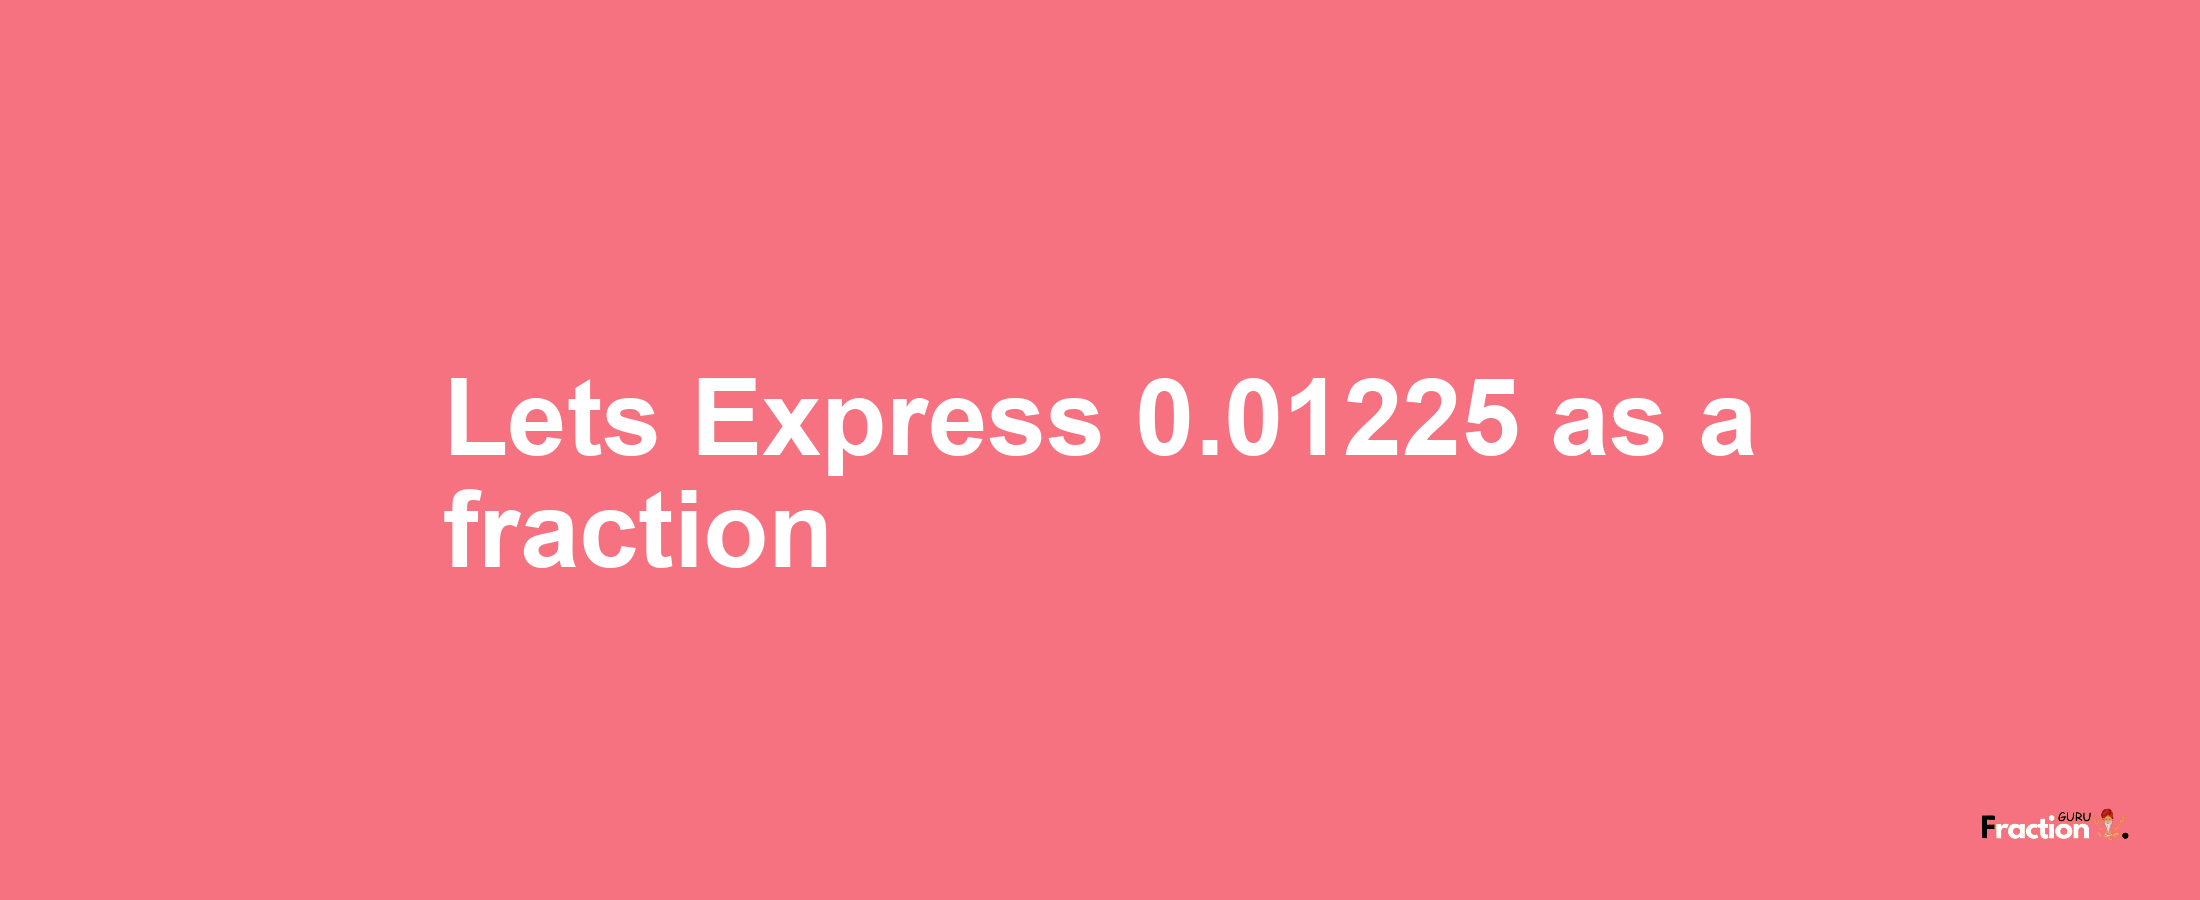 Lets Express 0.01225 as afraction